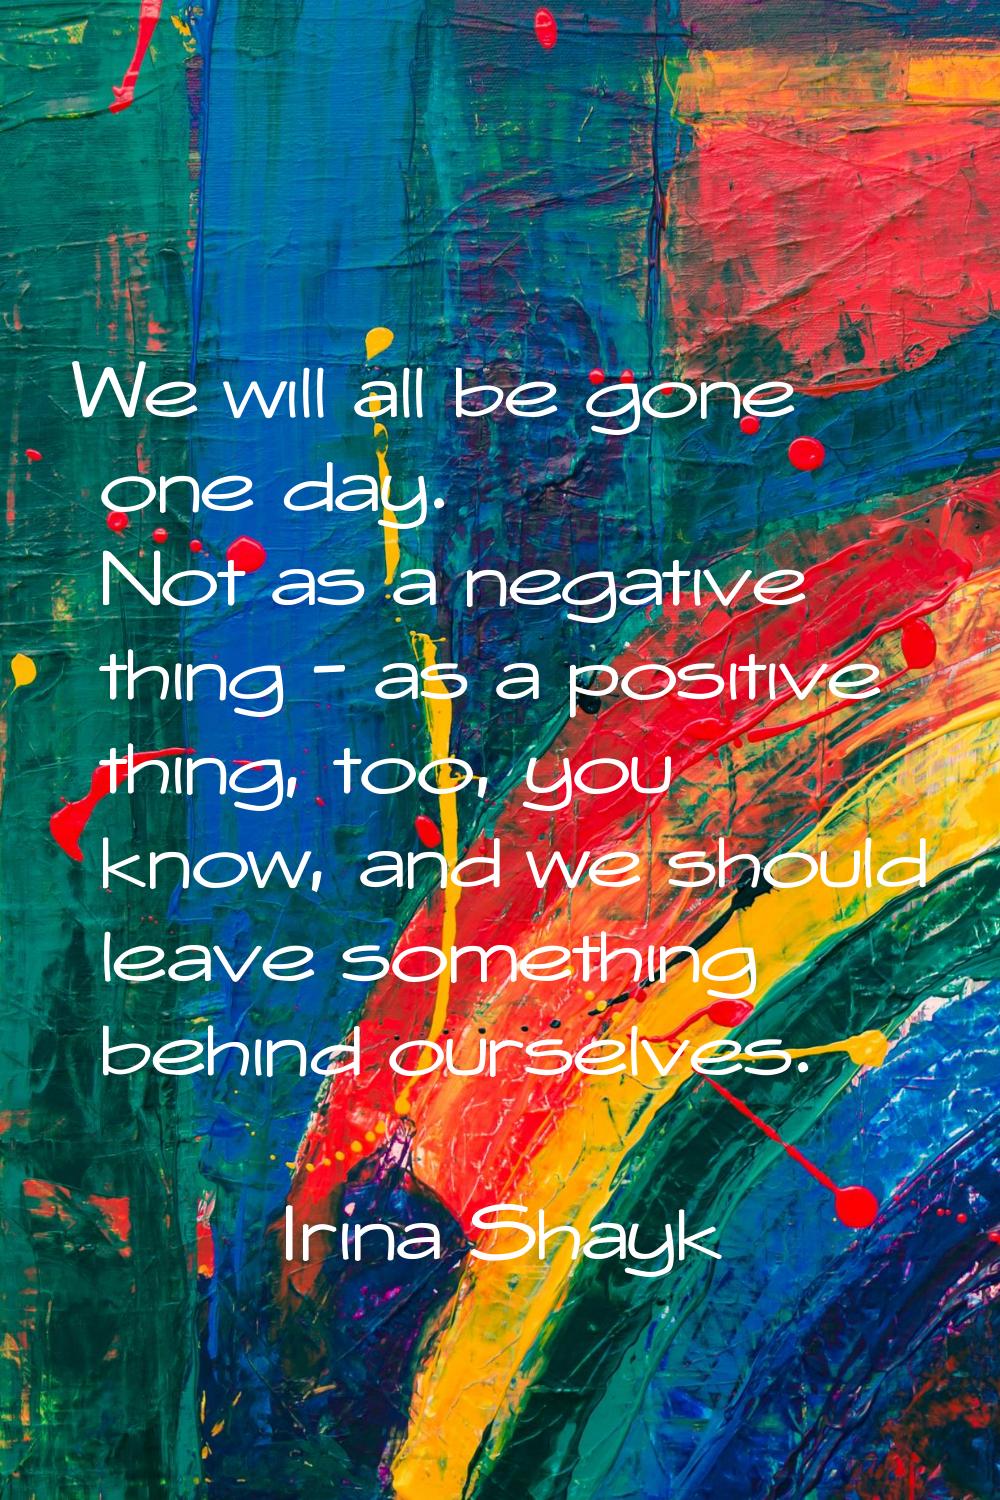 We will all be gone one day. Not as a negative thing - as a positive thing, too, you know, and we s